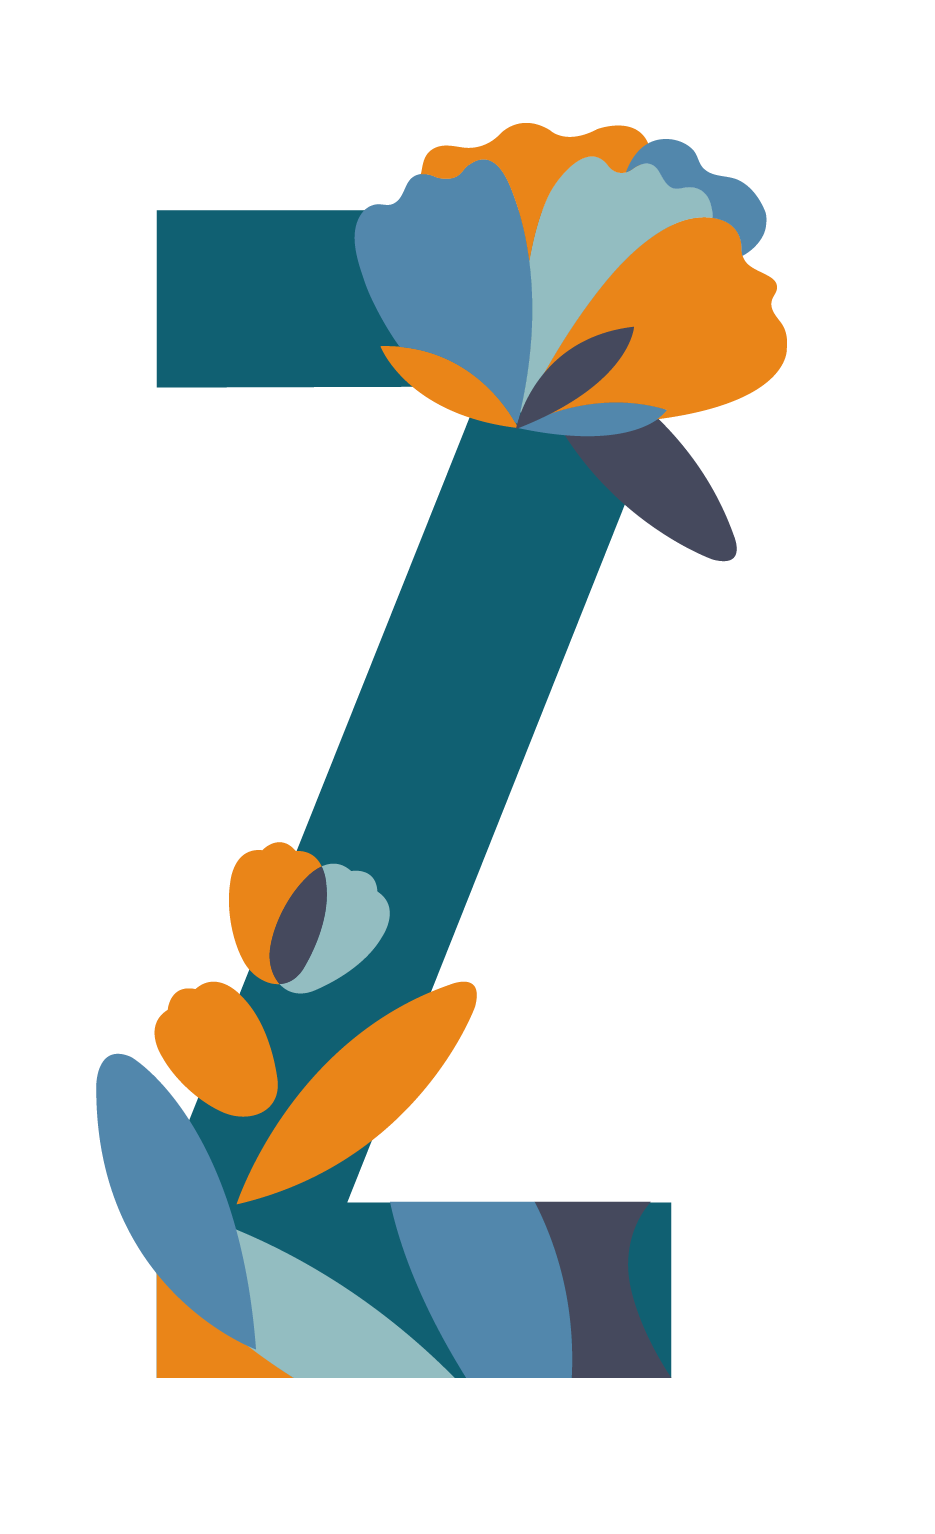 Z Letter PNG HD and HQ Image pngteam.com